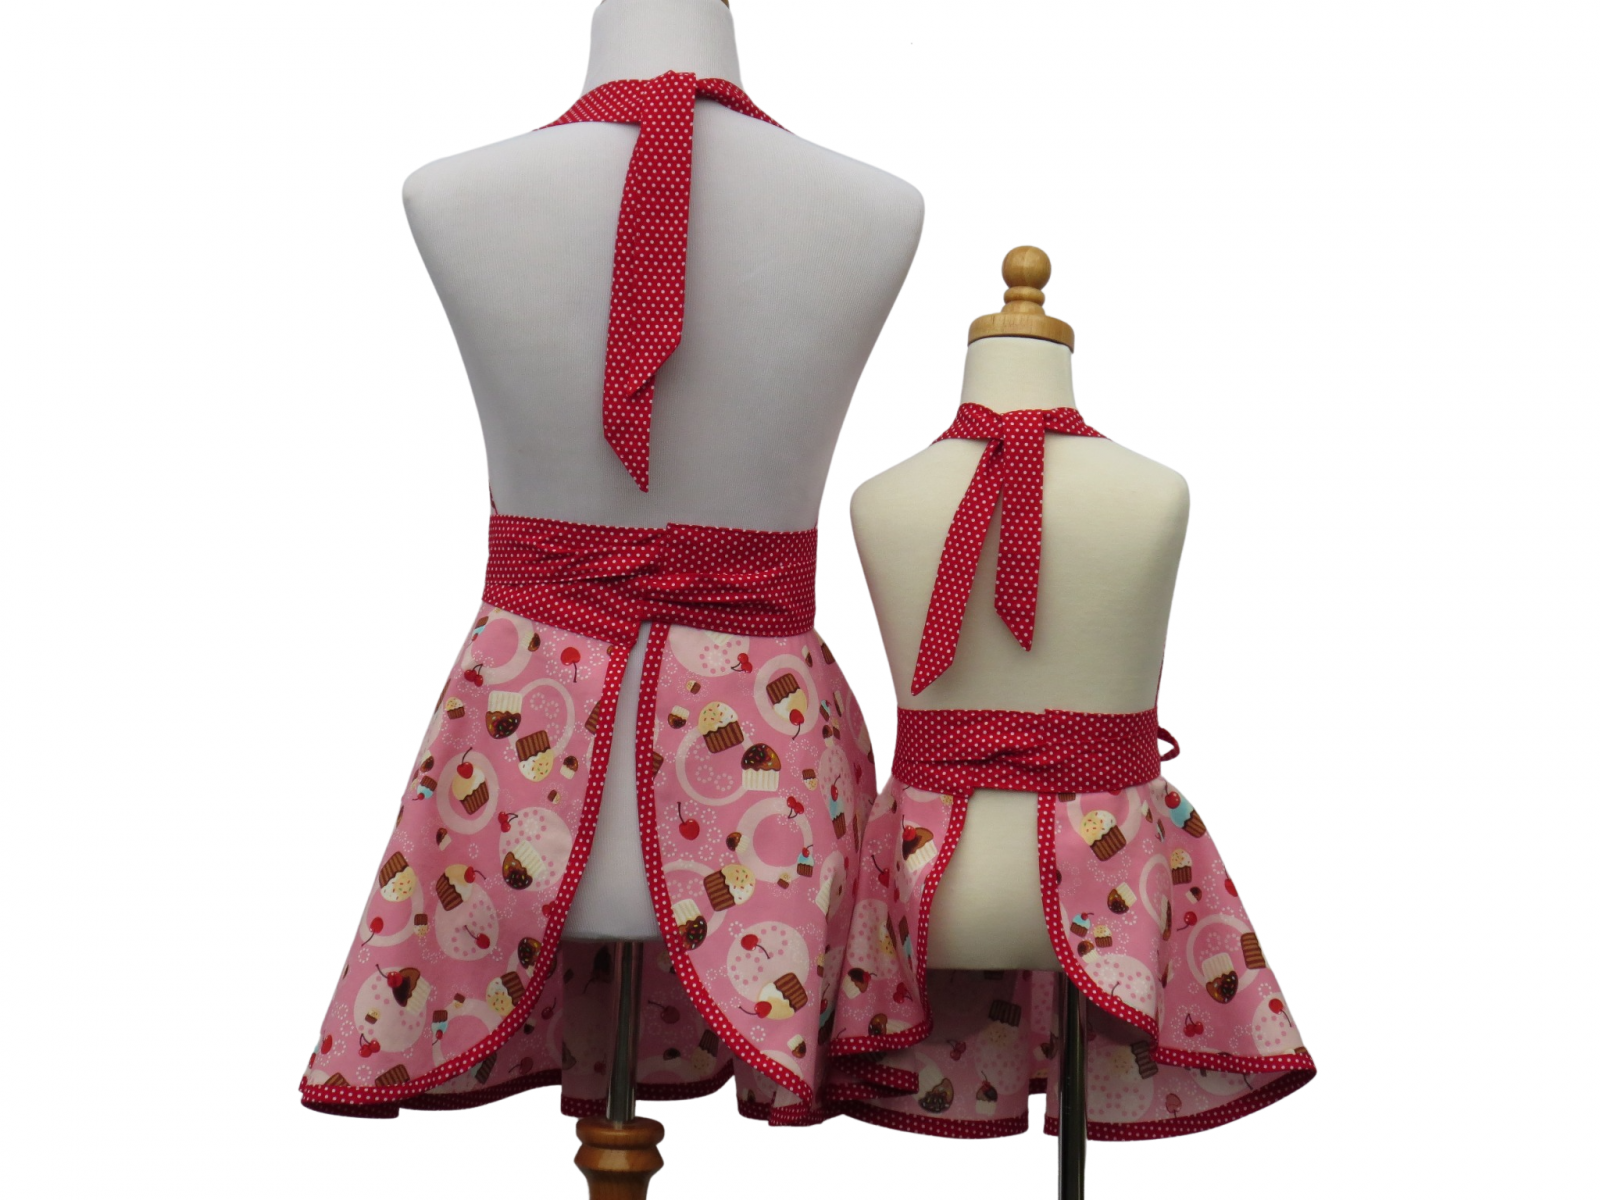 Mother Daughter Apron Sets - Real Food Real Deals